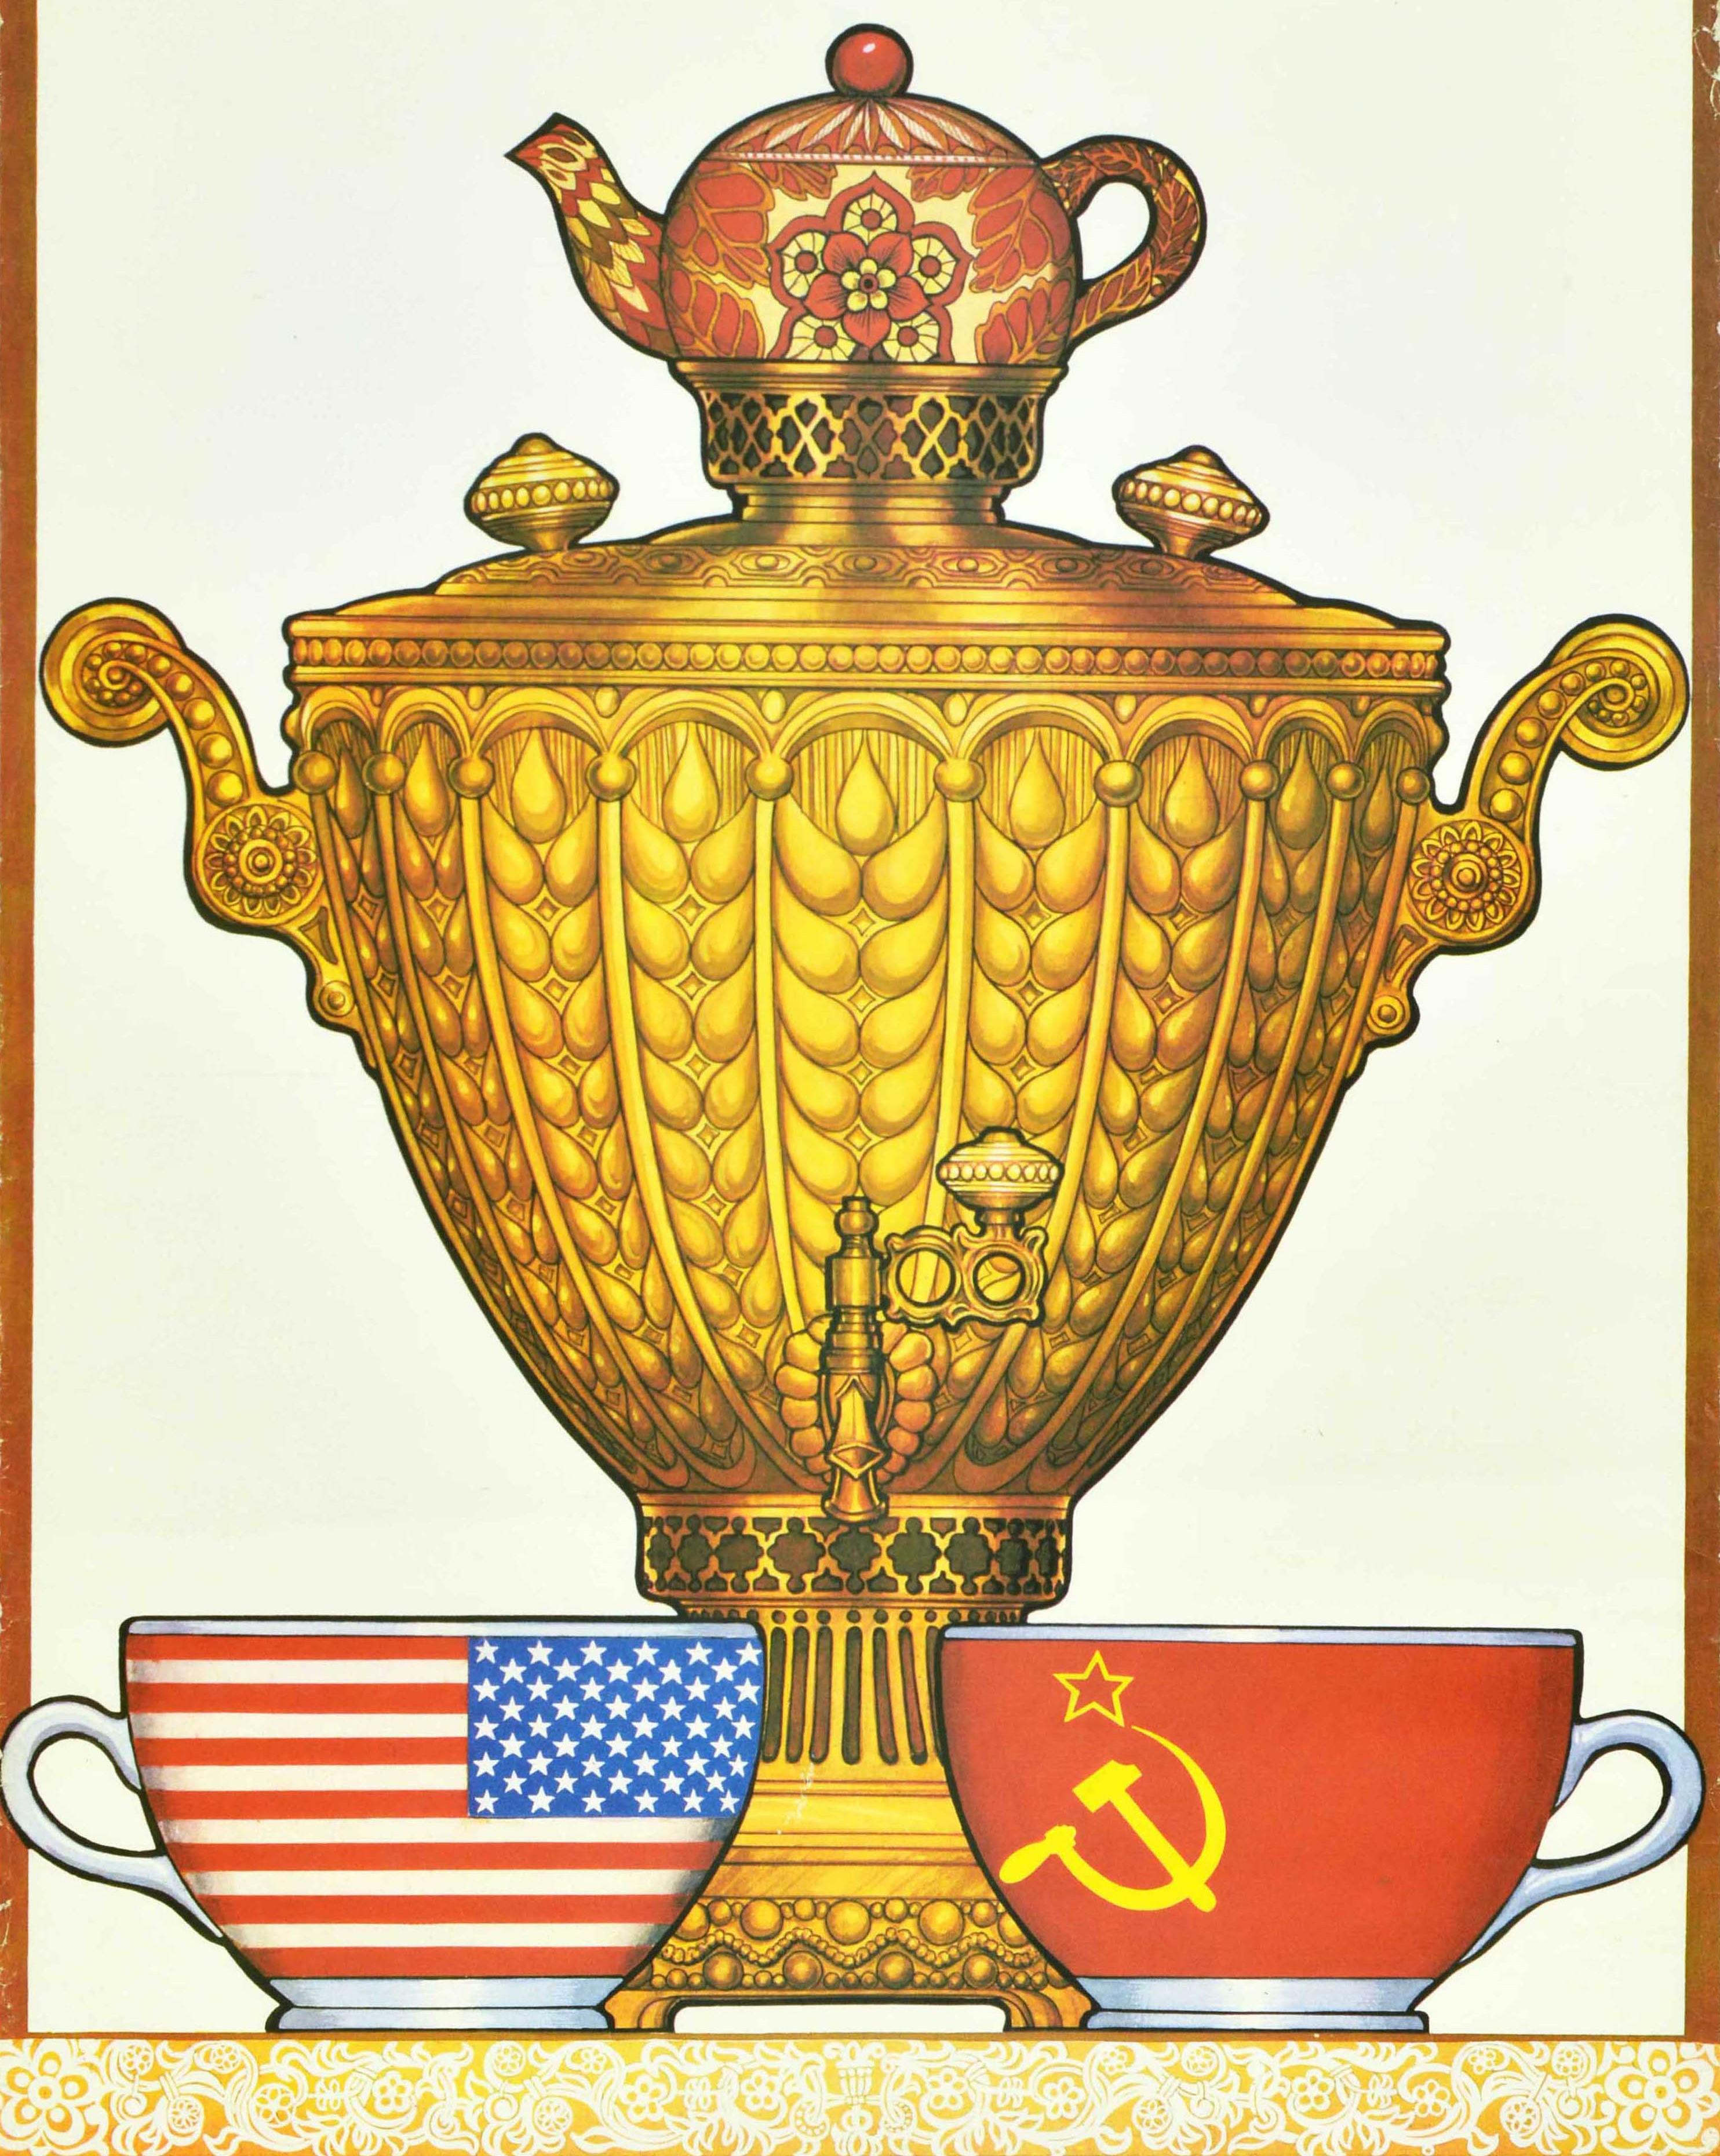 Original vintage Soviet Cold War propaganda poster - We shall live in peace! - featuring traditional style artwork depicting a samovar with a floral tea pot on top and two tea cups on the table cloth below, one decorated with an American flag and